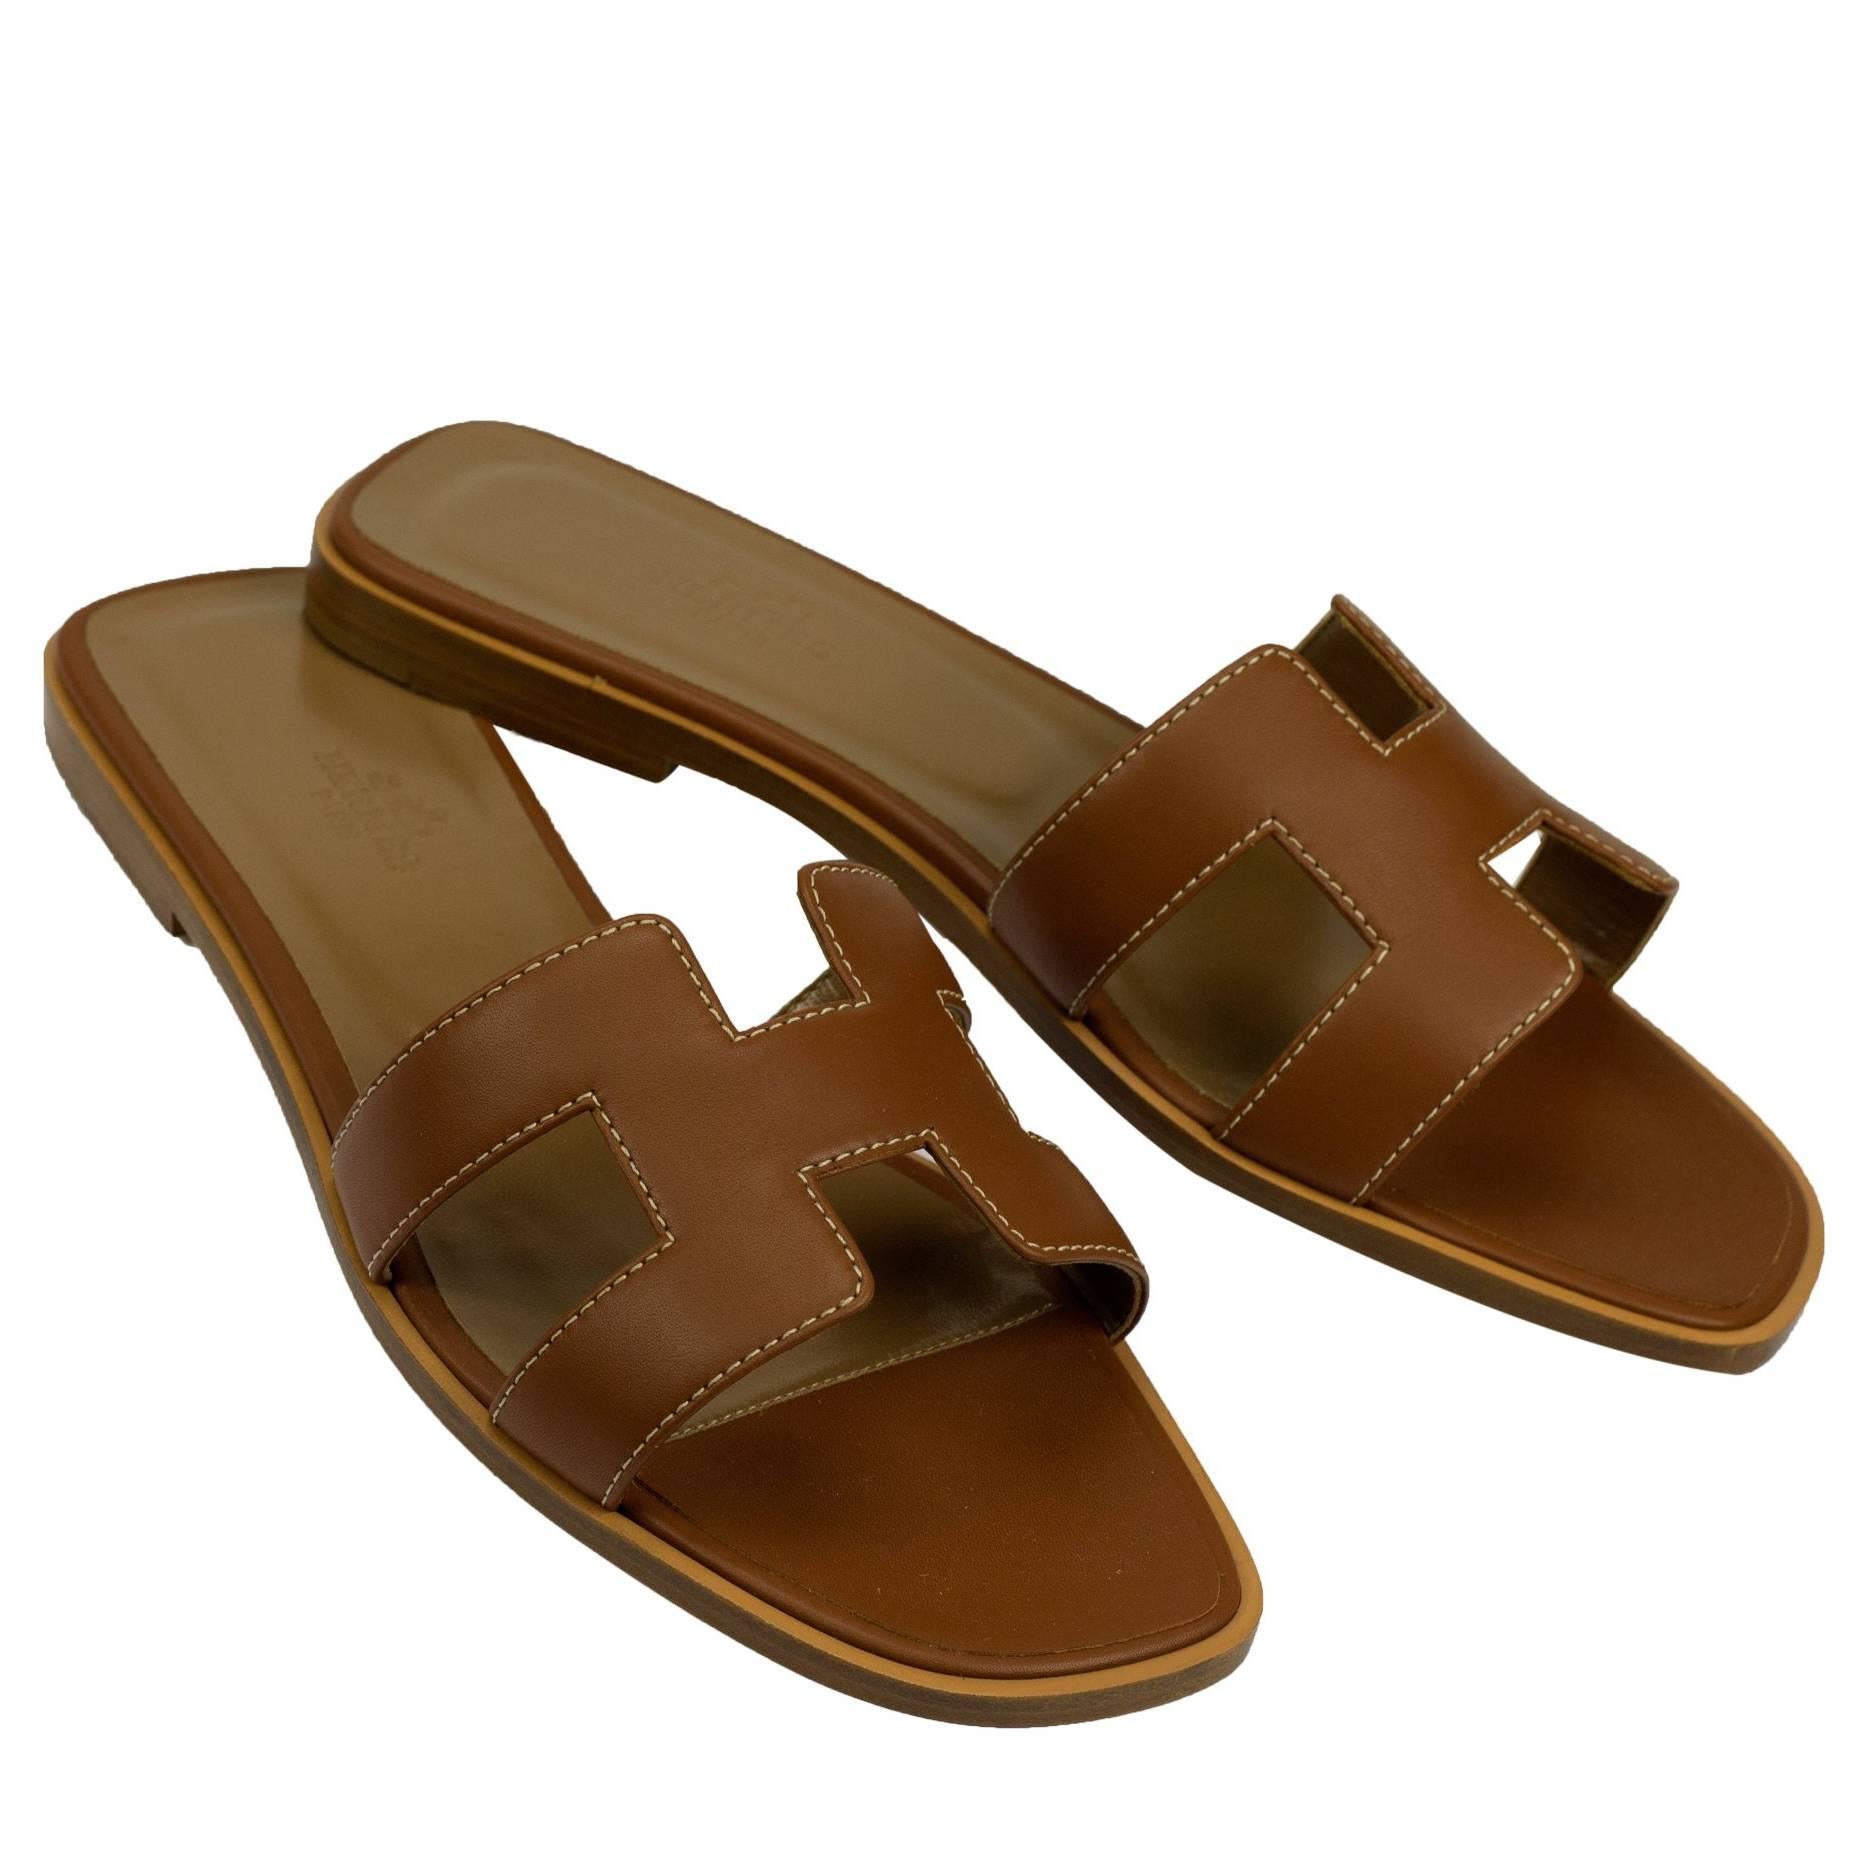 Hermes Woman Sandals "Oran" Box Leather Gold with Ecru Stitching Color 7.5 Size